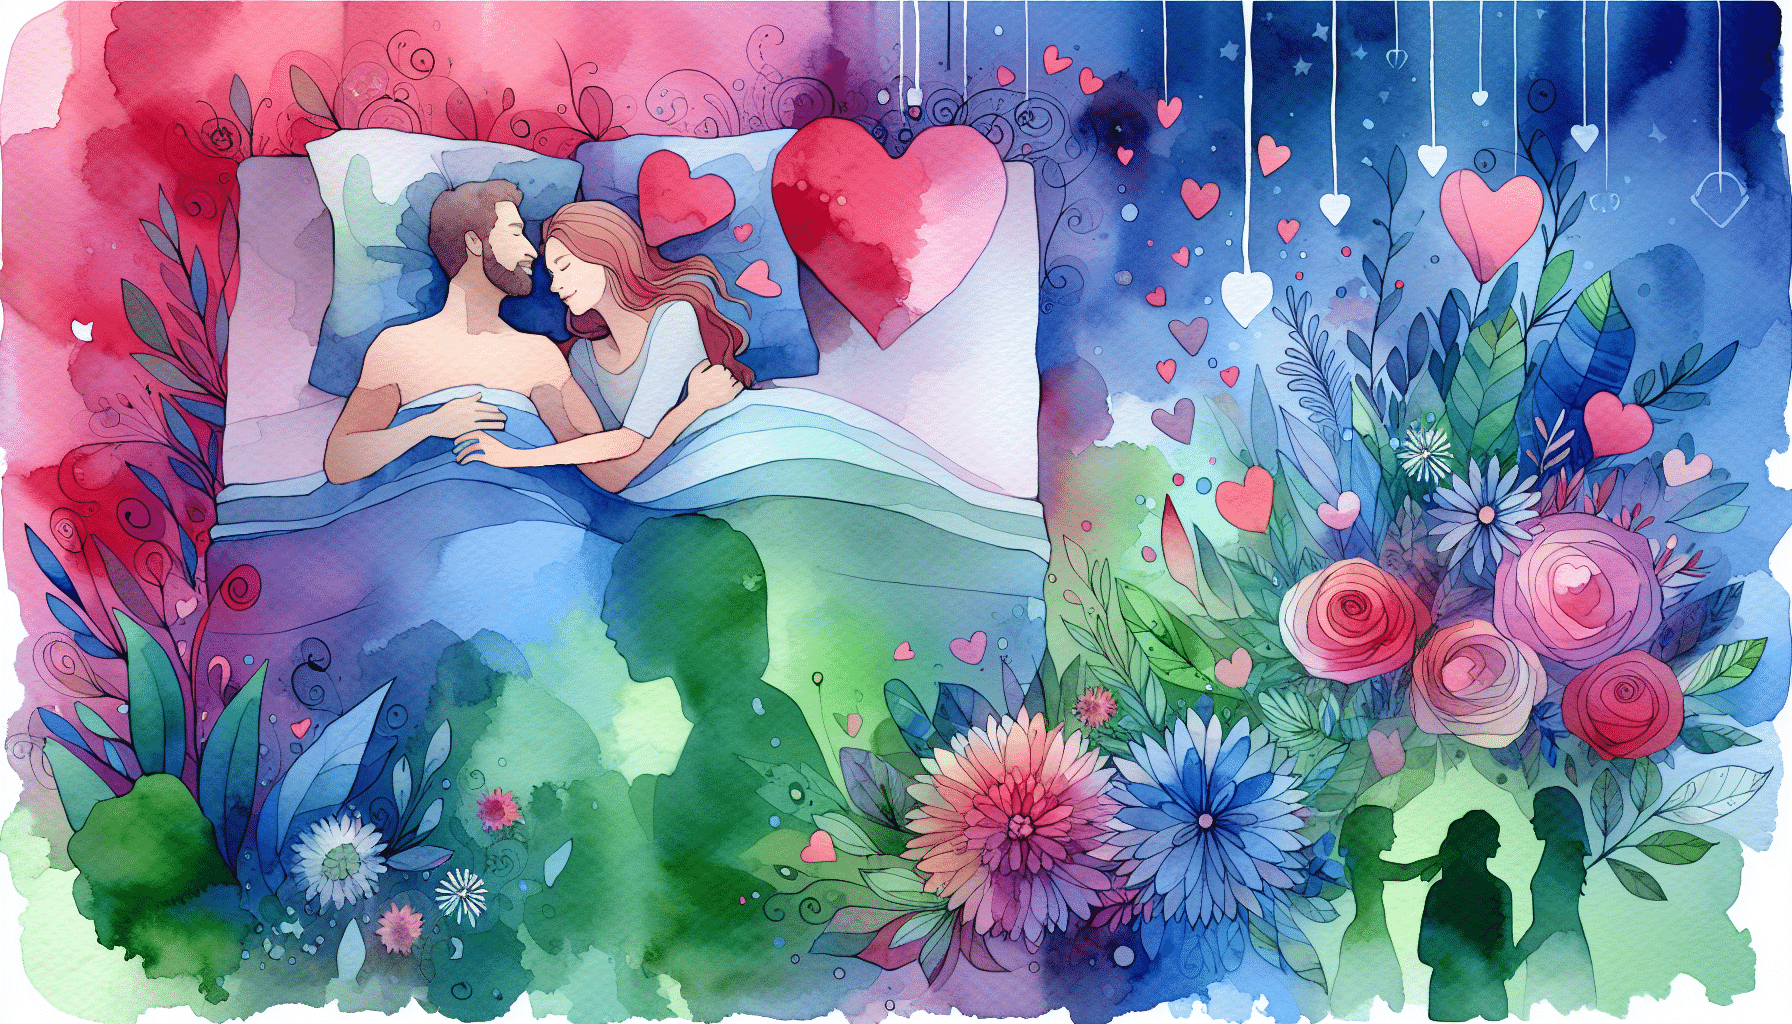 Love in Bloom Romantic Adventures Under the Covers